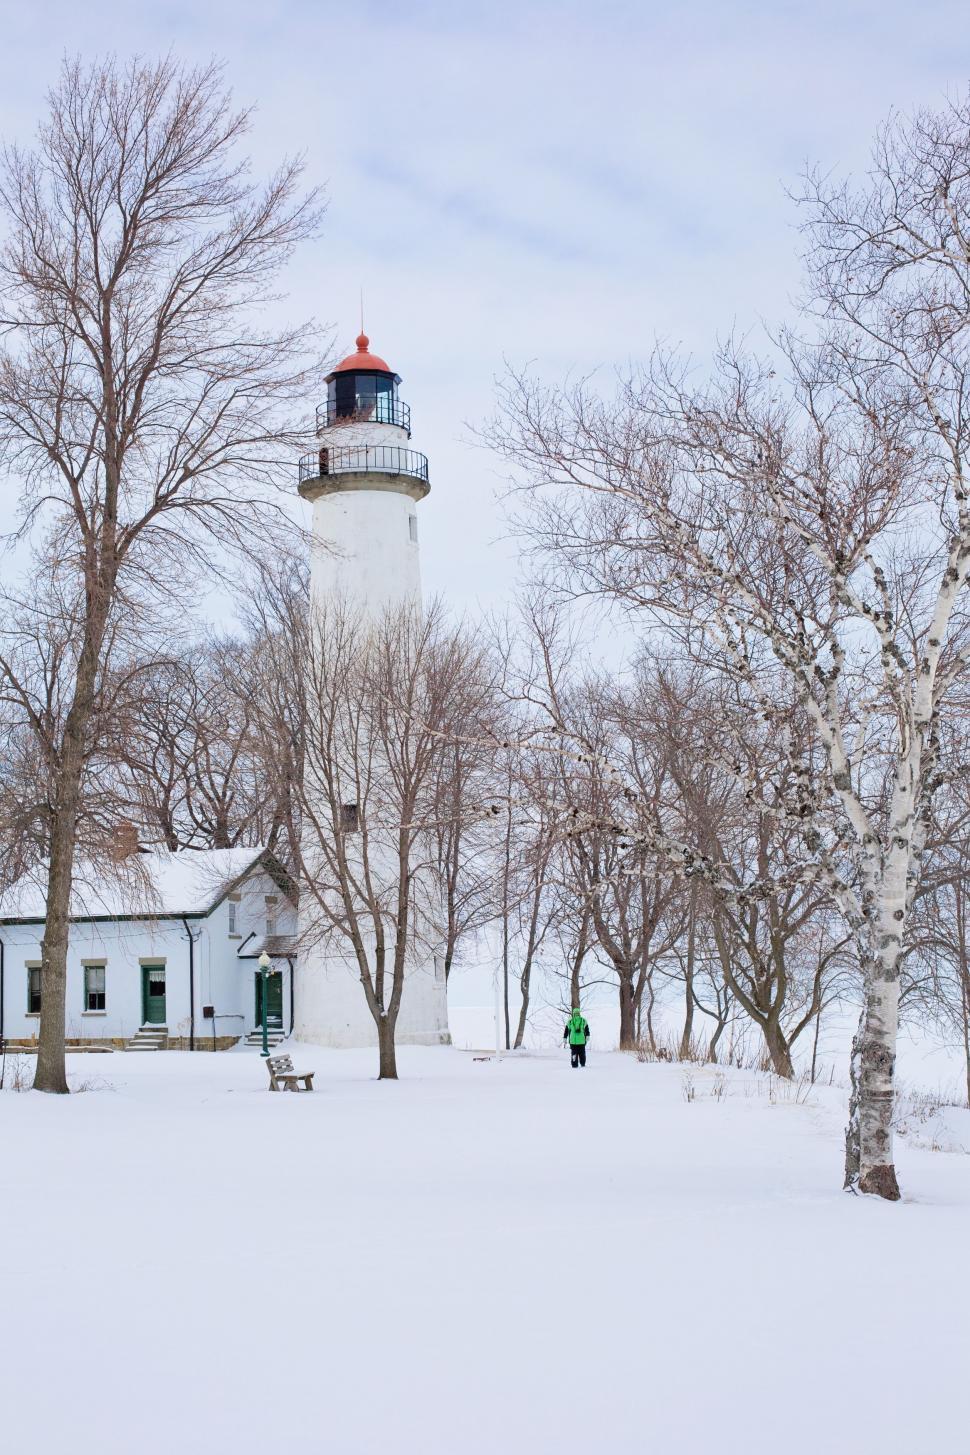 Free Image of Lighthouse and Snow  